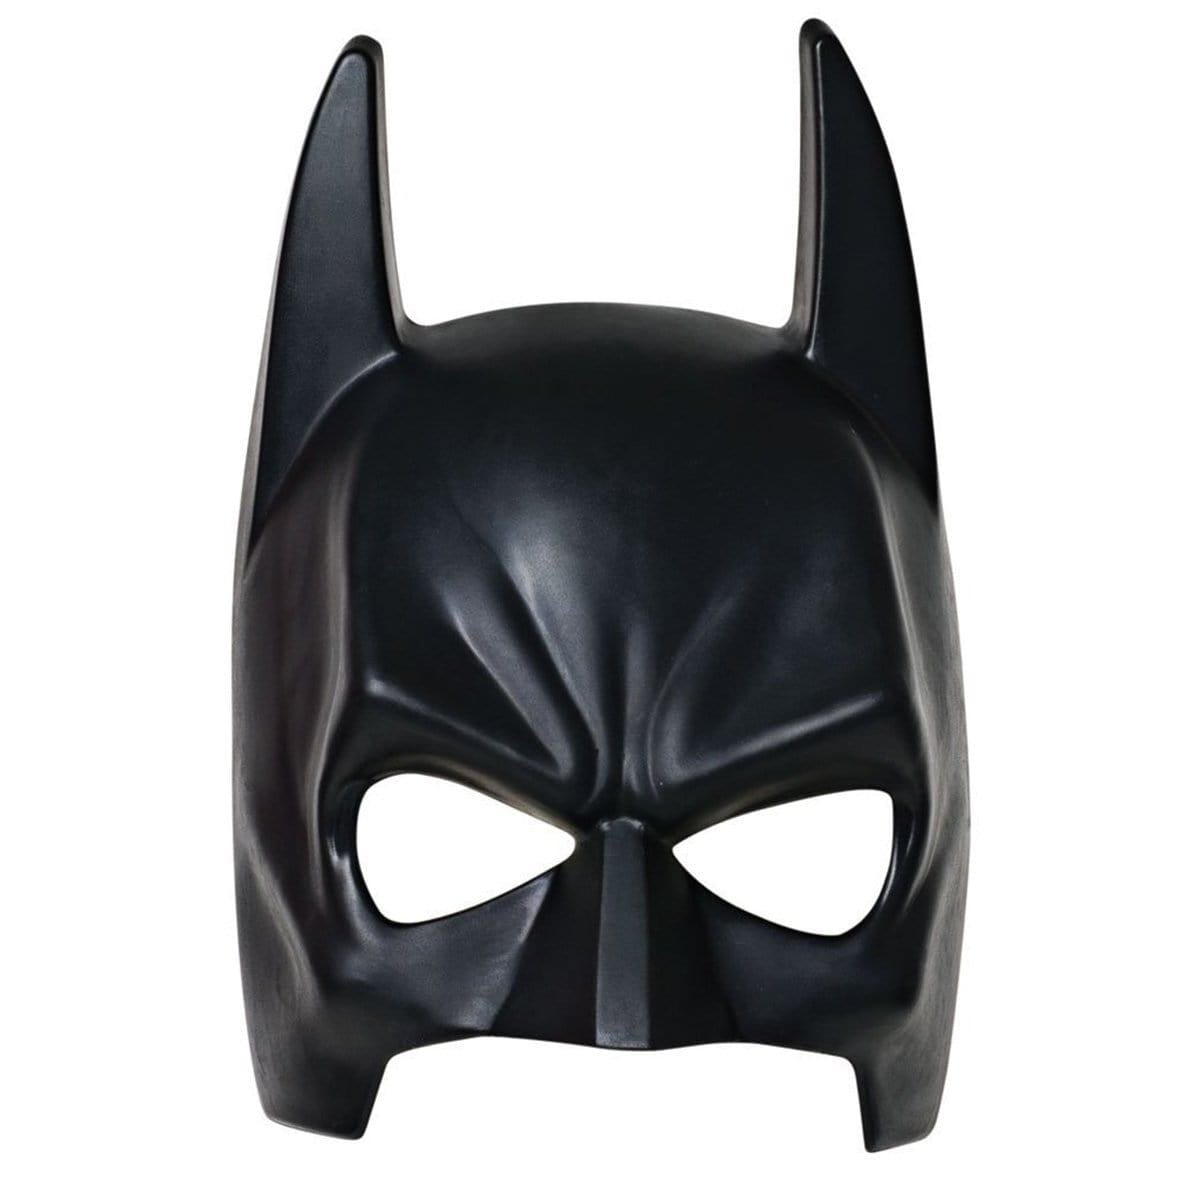 Buy Costume Accessories Batman mask for kids, Batman sold at Party Expert